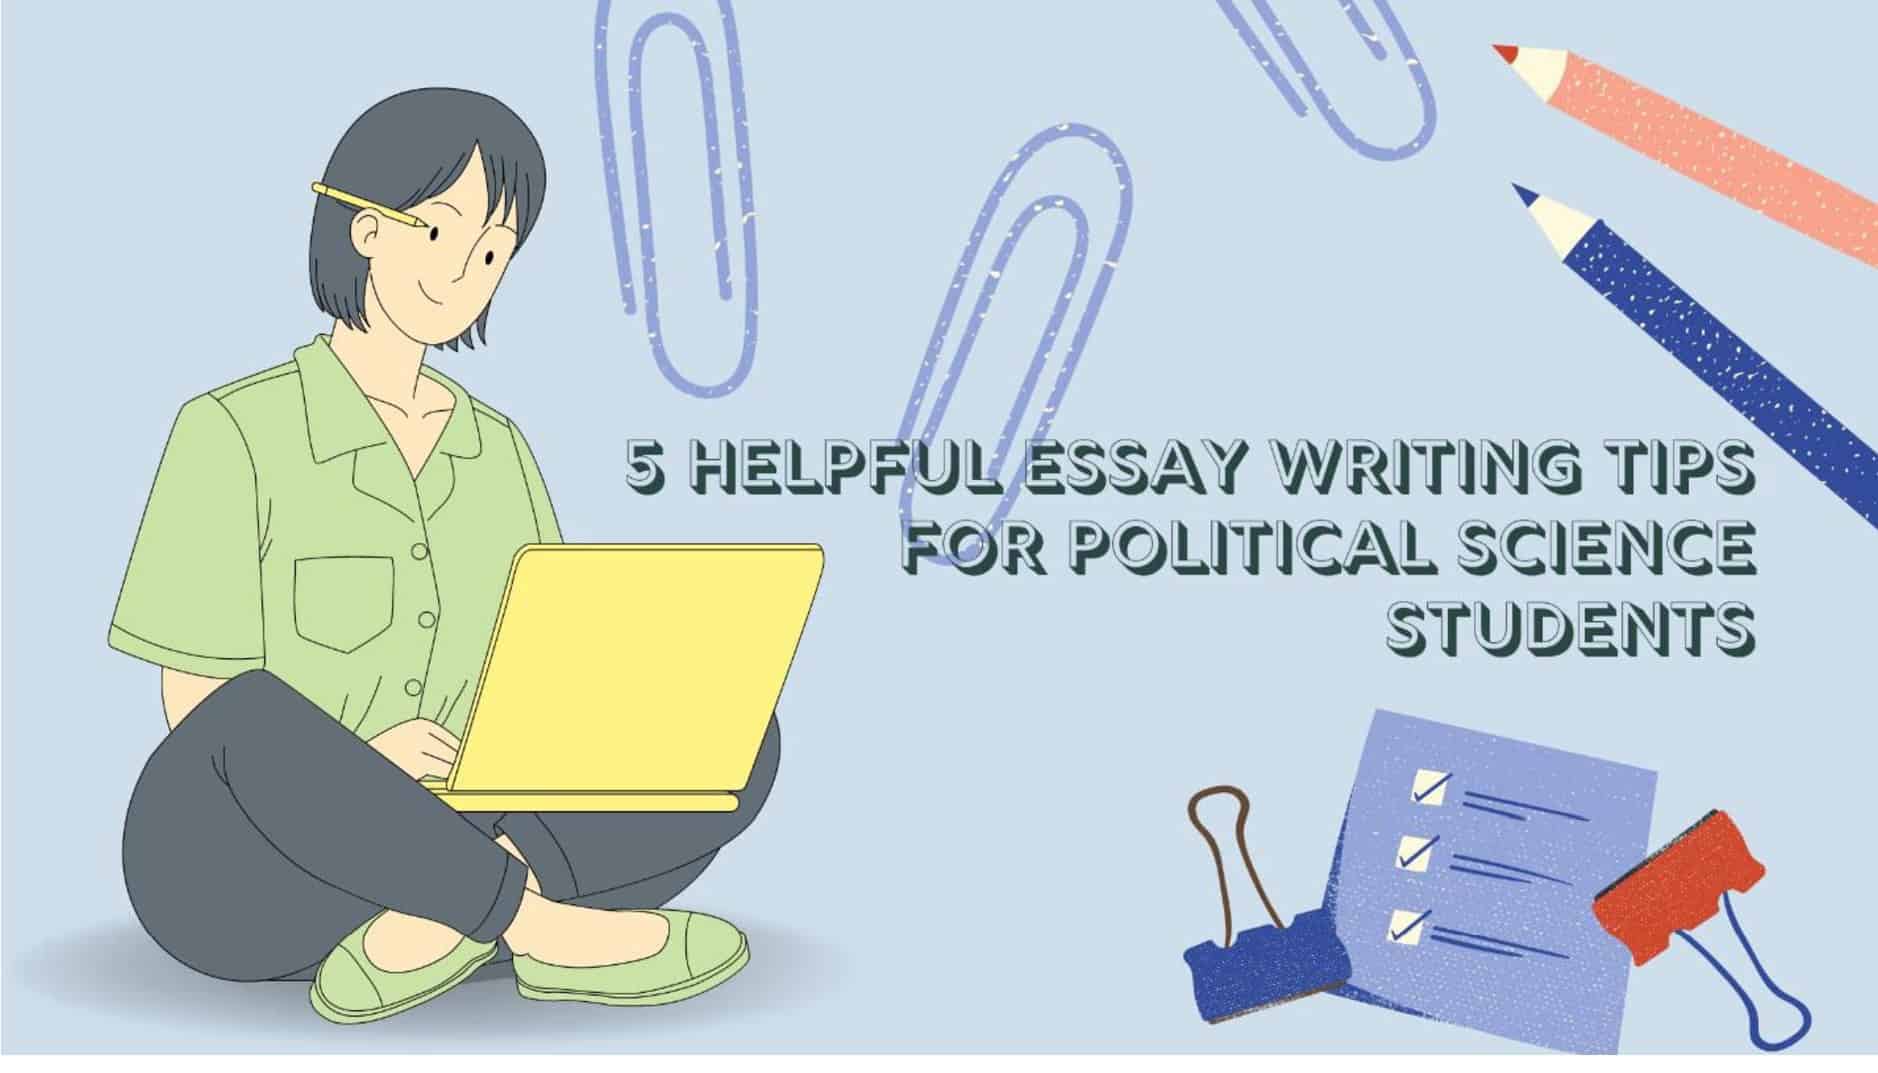 Essay Writing Tips for Political Science Students